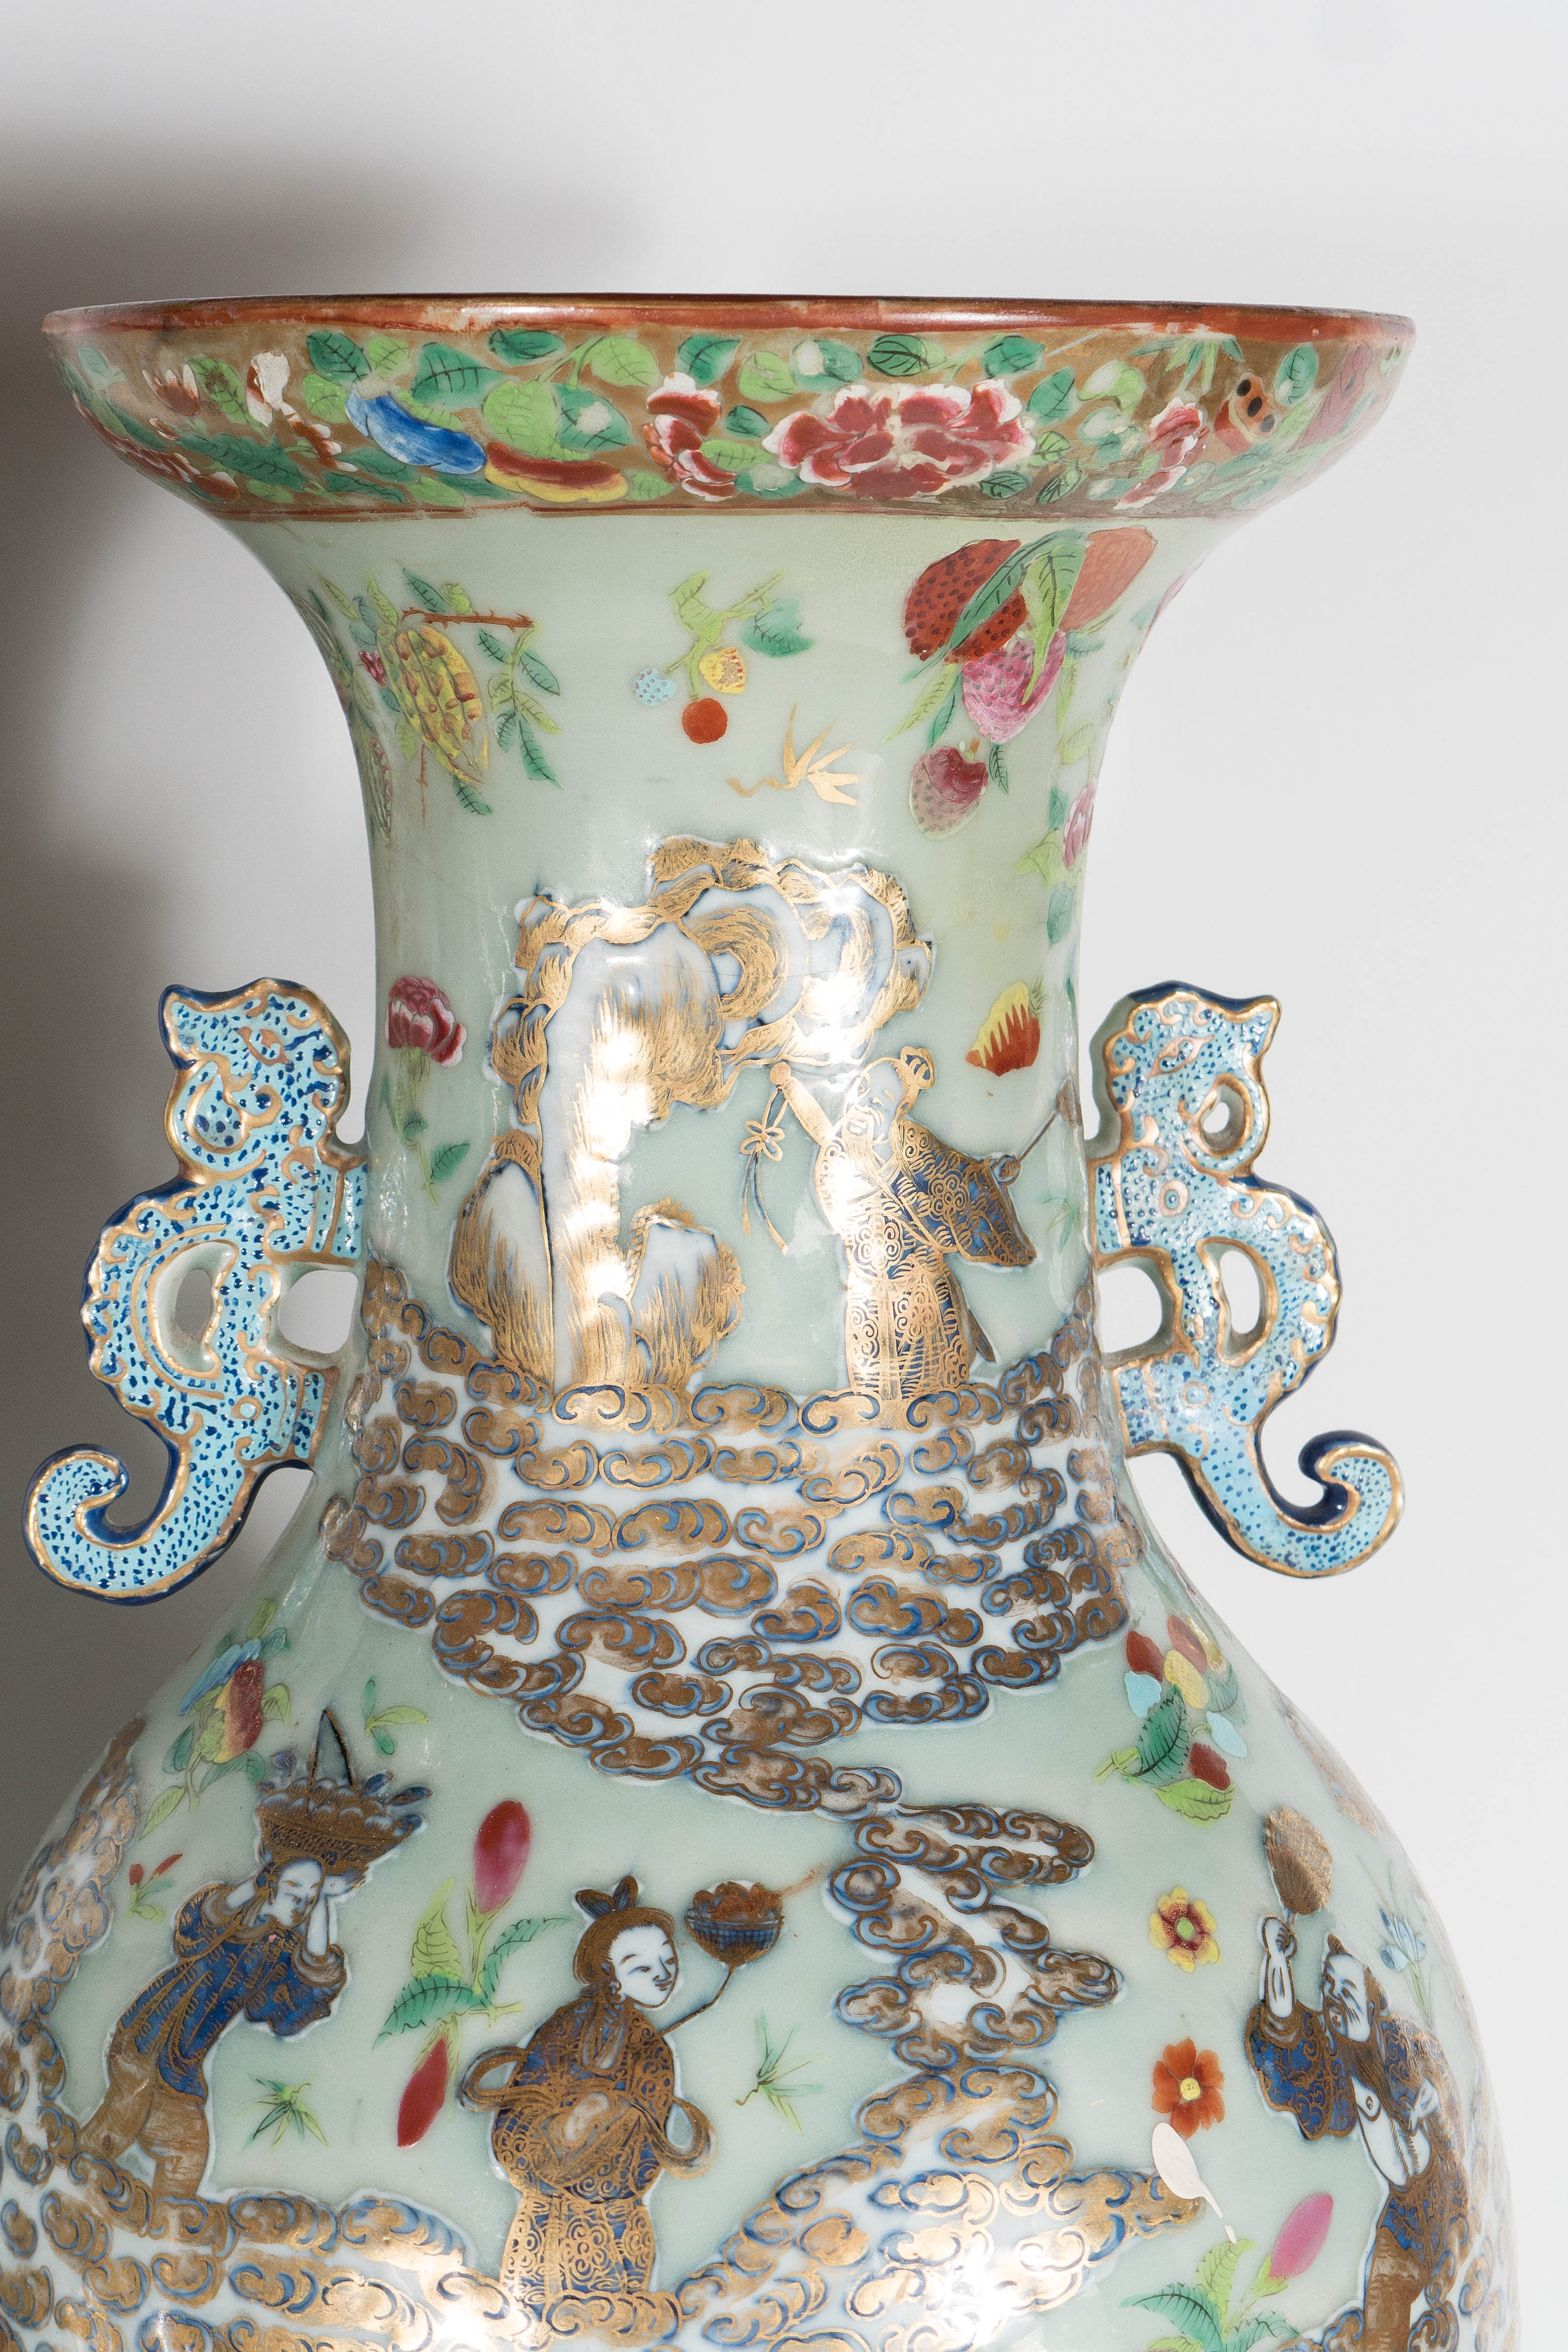 Pair of exquisite celadon Chinese famille rose floor vases, having baluster shaped body. Two chi-long dragon ears flanked to the neck. The bodies are richly decorated in famille rose design with vivid plums, flower blossoms, foliage, exotic birds